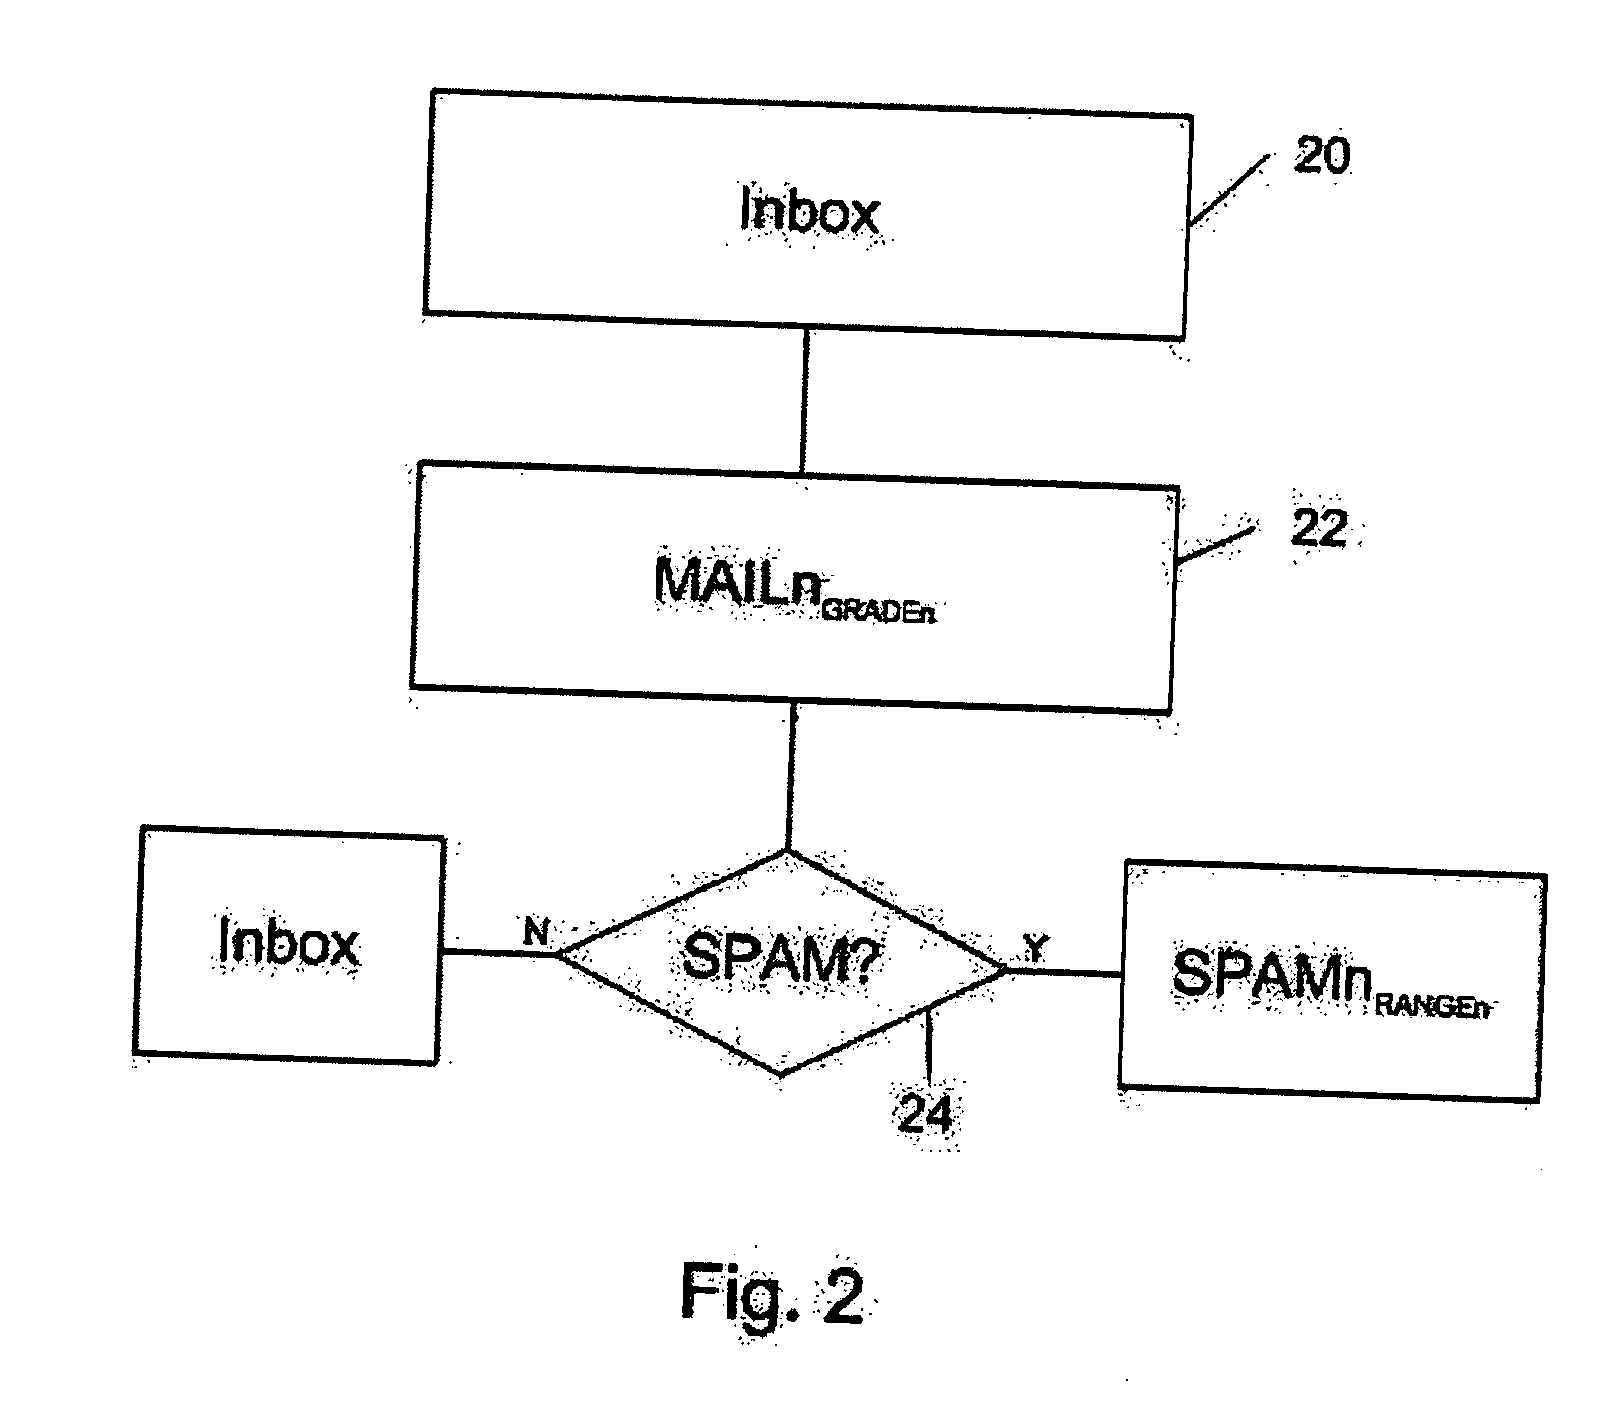 Classification of electronic mail into multiple directories based upon their spam-like properties